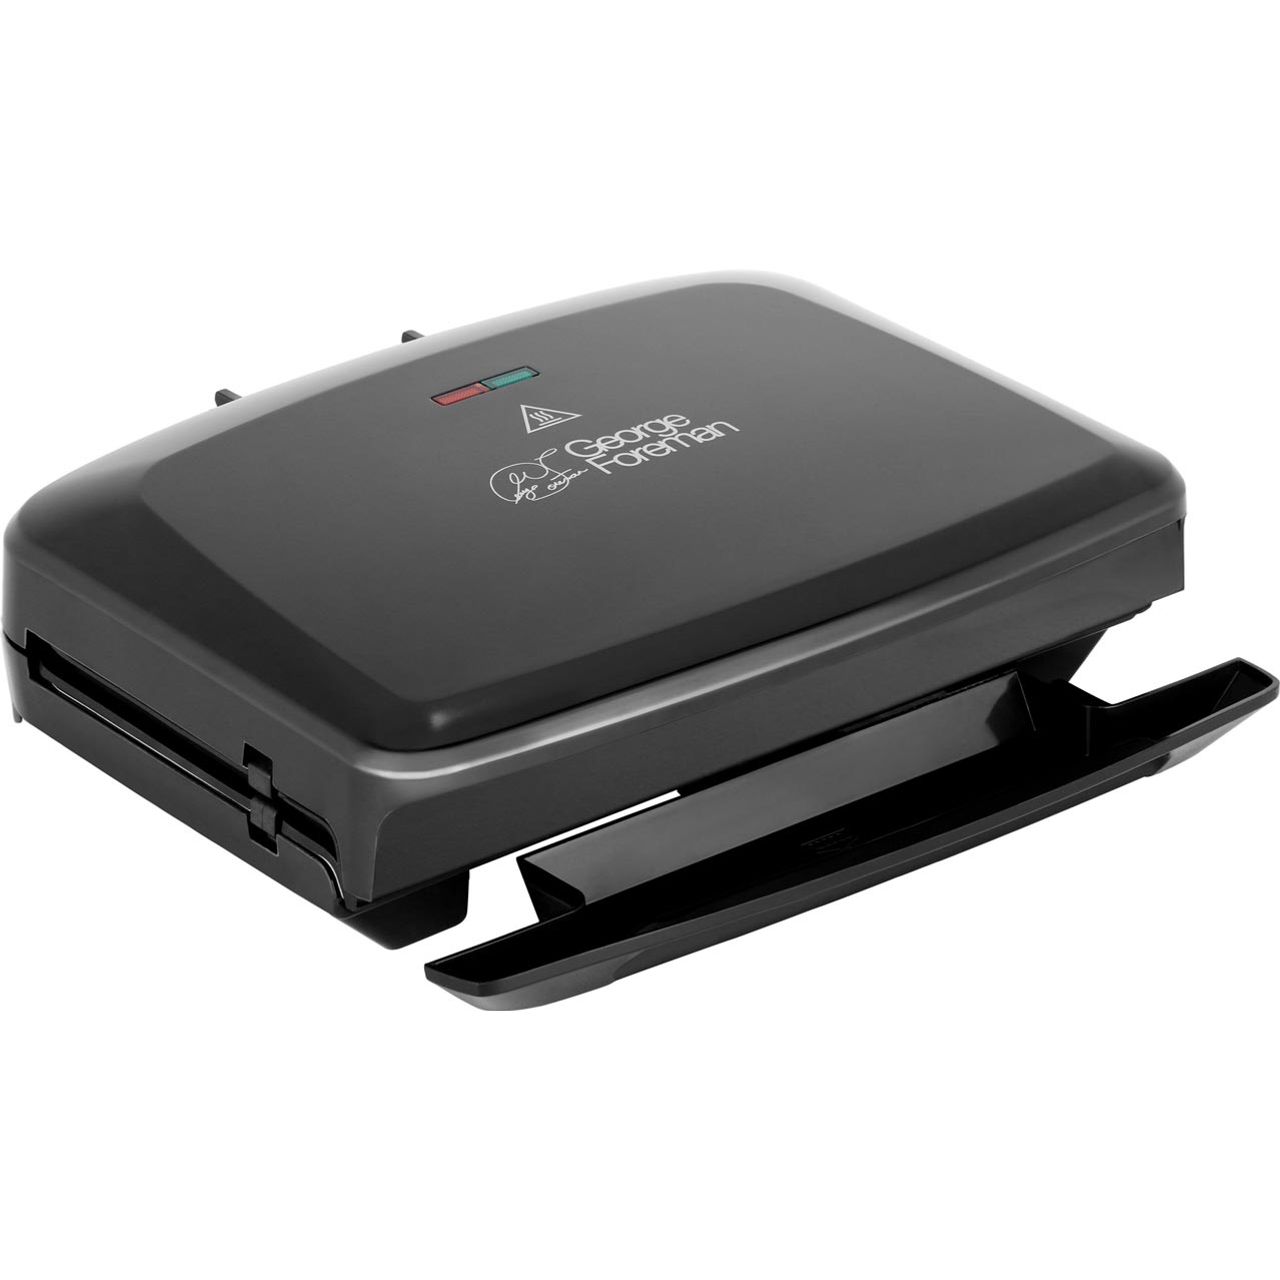 George Foreman Family 5 Portion 24330 Health Grill Review